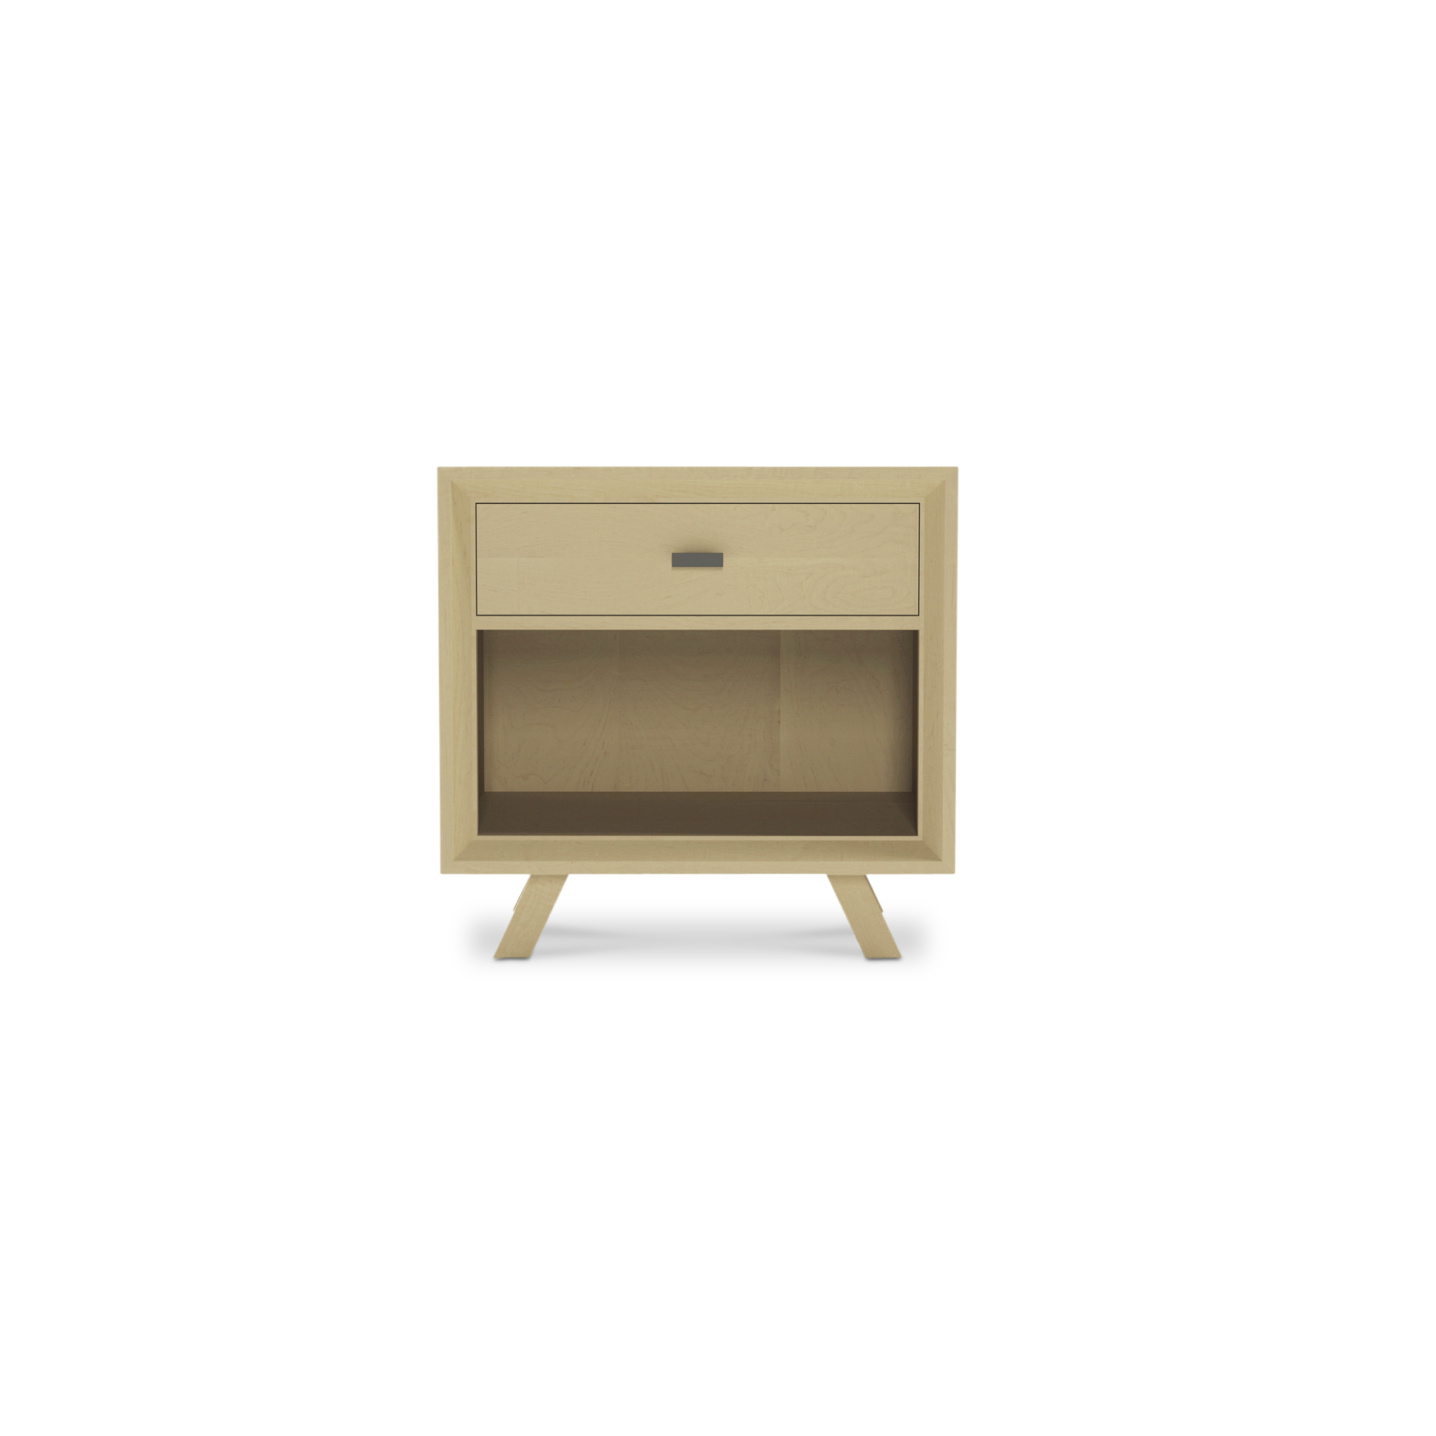 Solid maple wood Scandinavian nightstand with one drawer